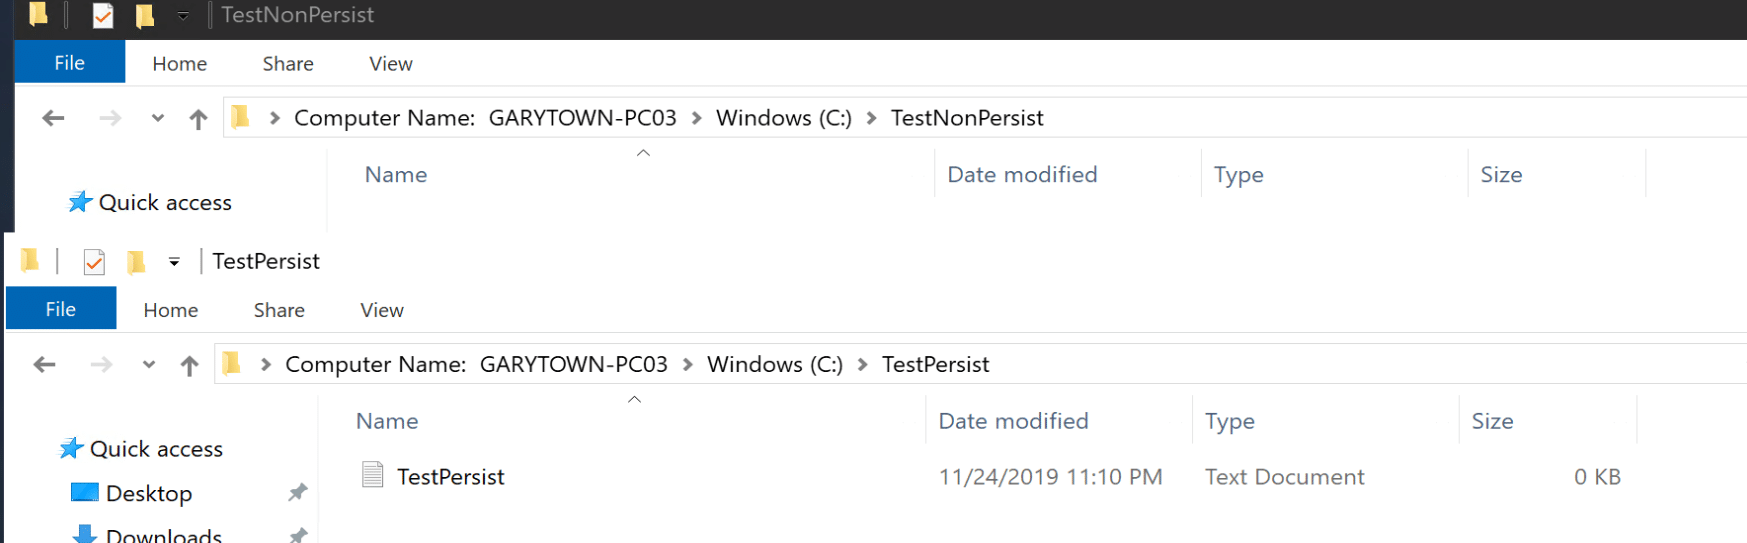 File was automatically removed during reboot from the folder not in the exclusion list.